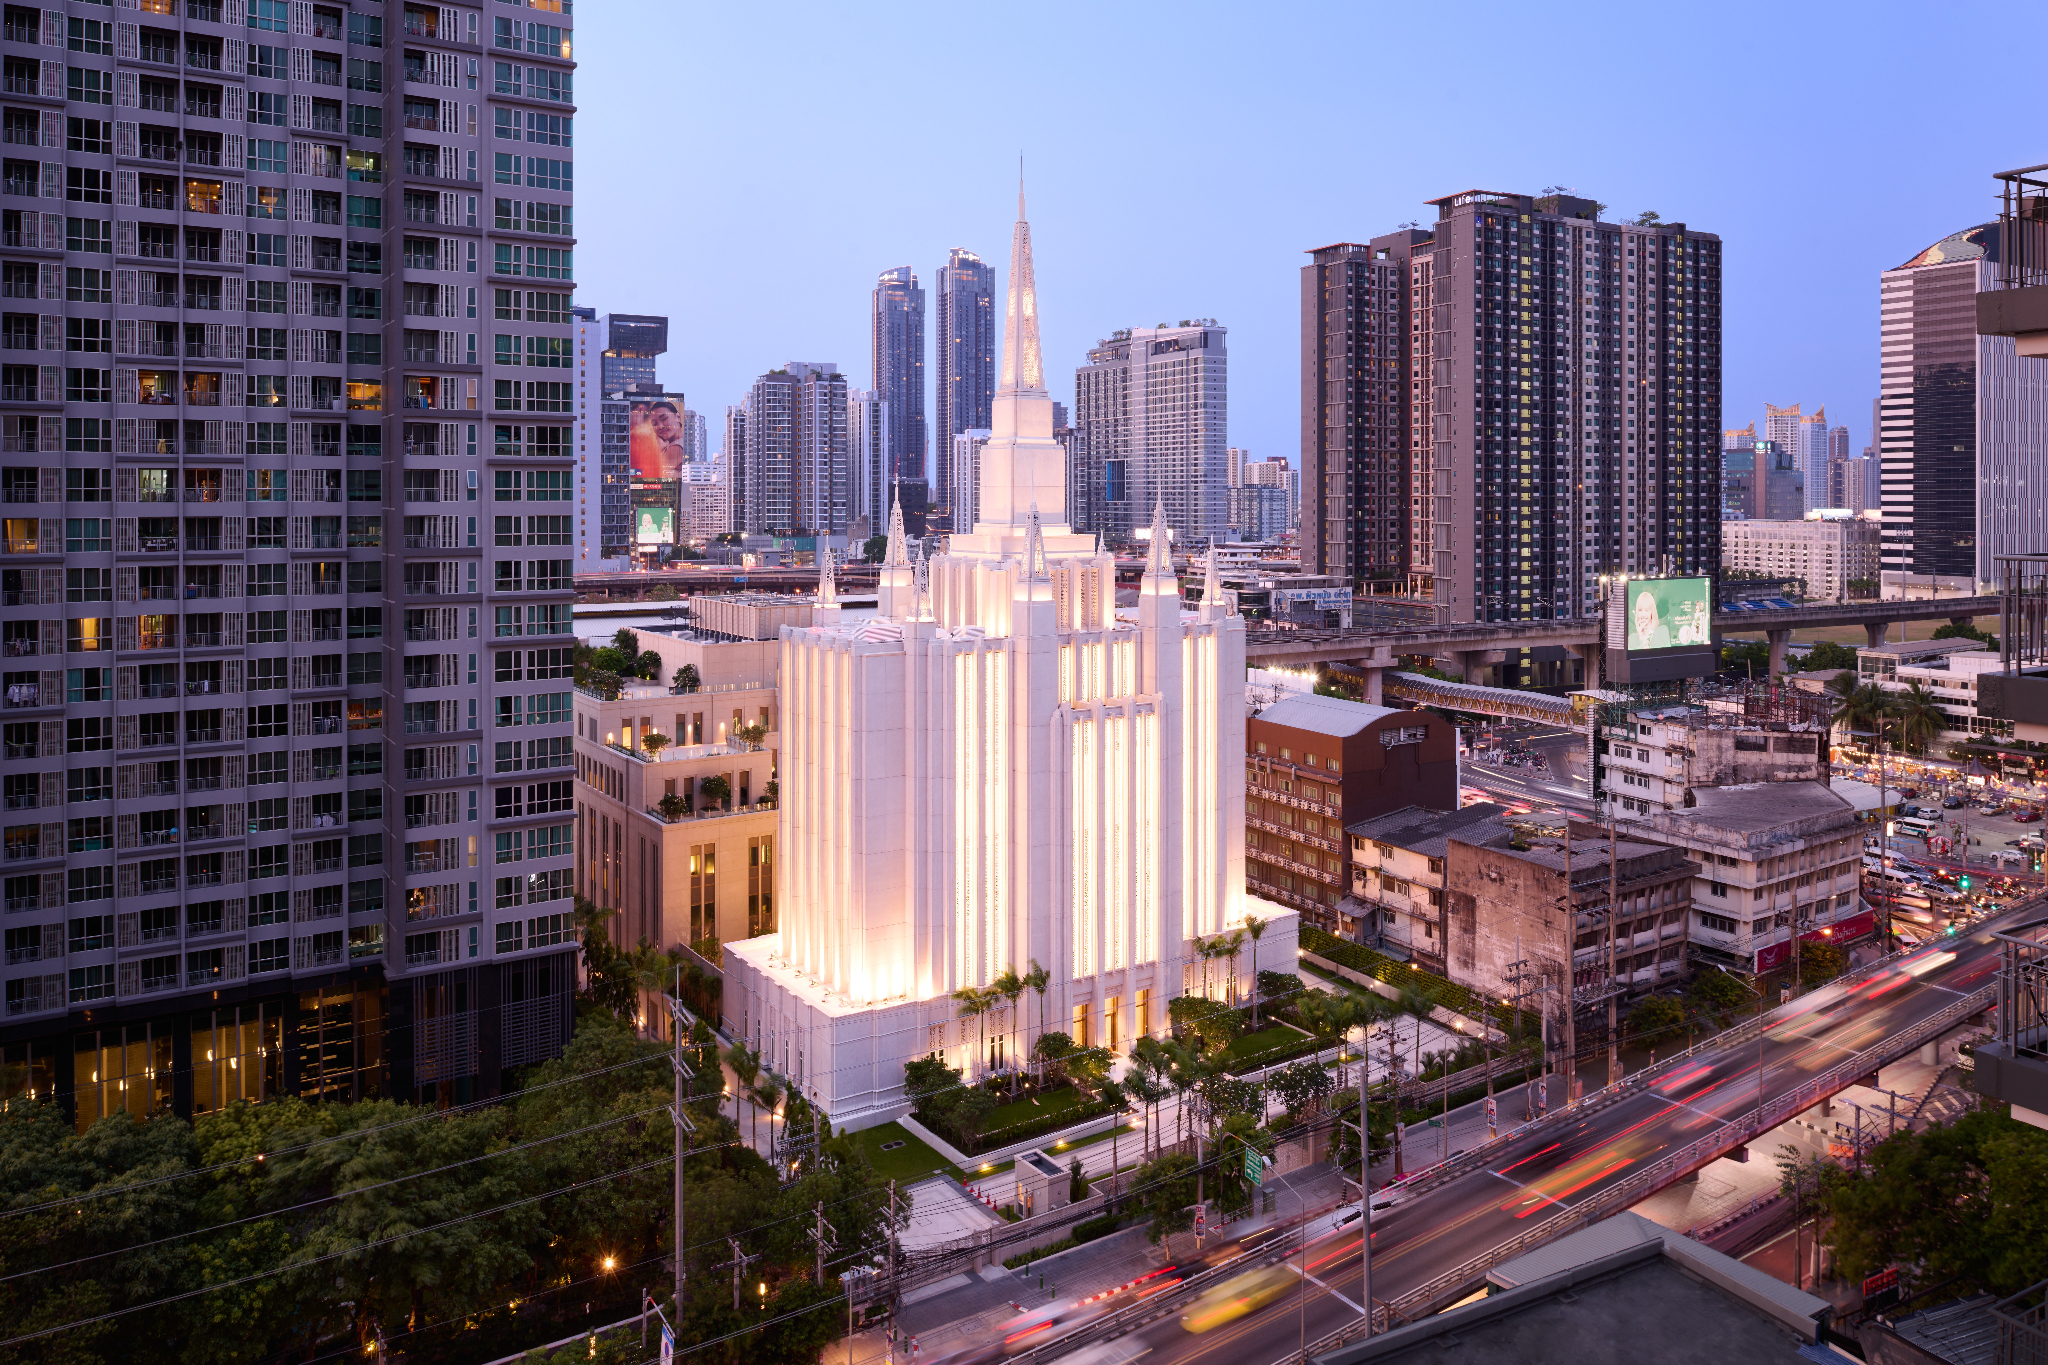 The exterior of the Bangkok Thailand Temple, a tall, off-white building with small spires on top and several skyscrapers around it. 